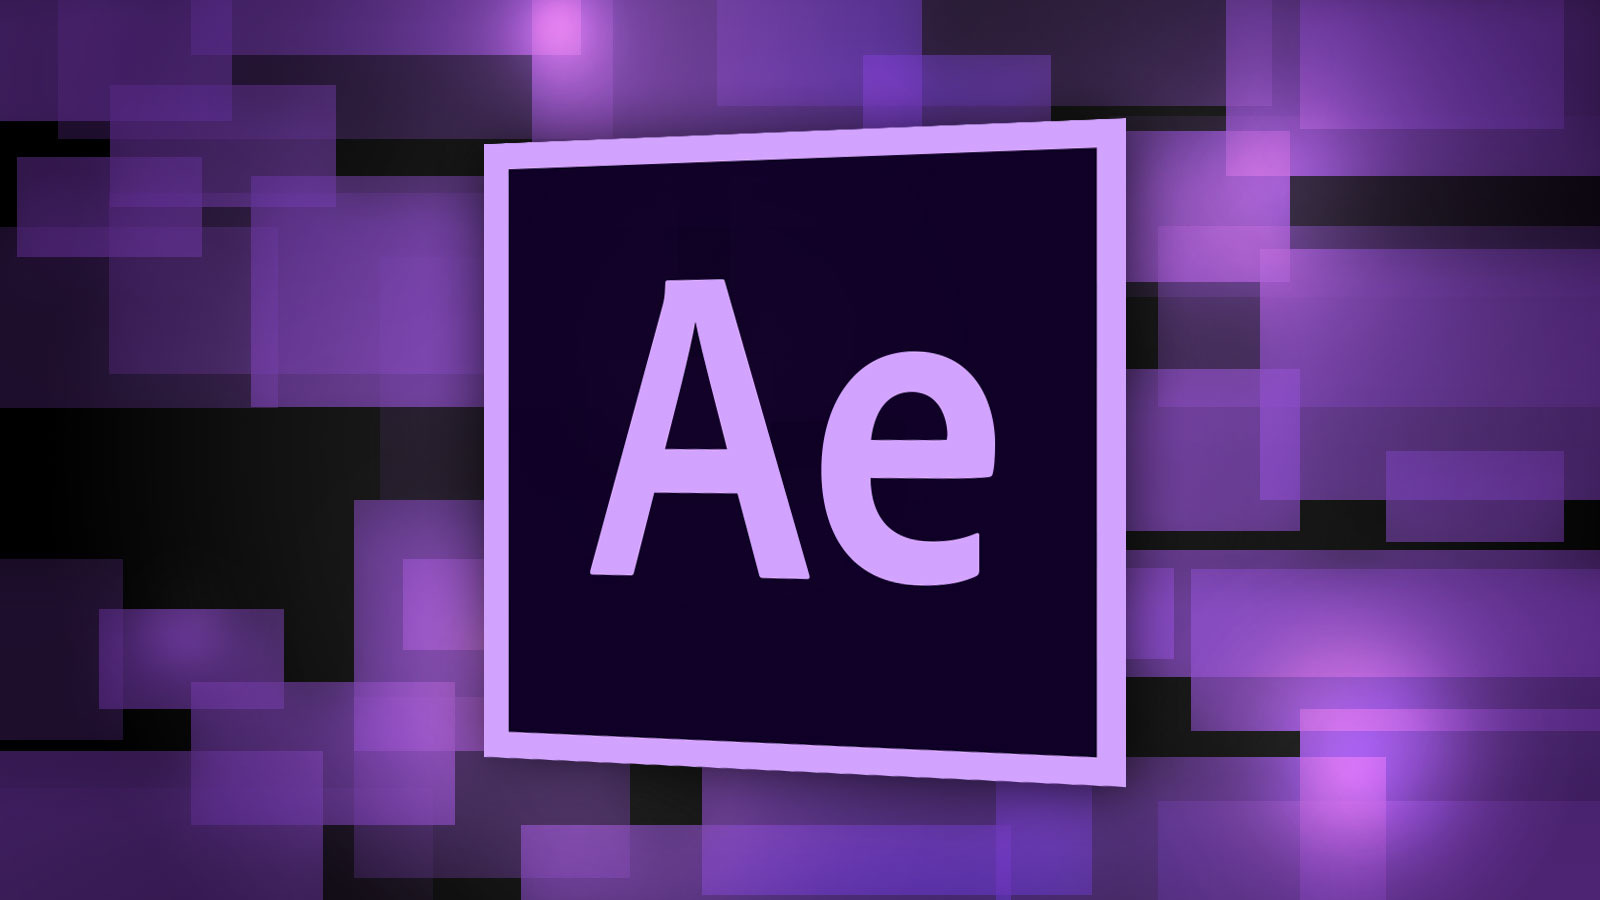 Video Editor After Effects - Adobe After Effects Cc Free Download - HD Wallpaper 